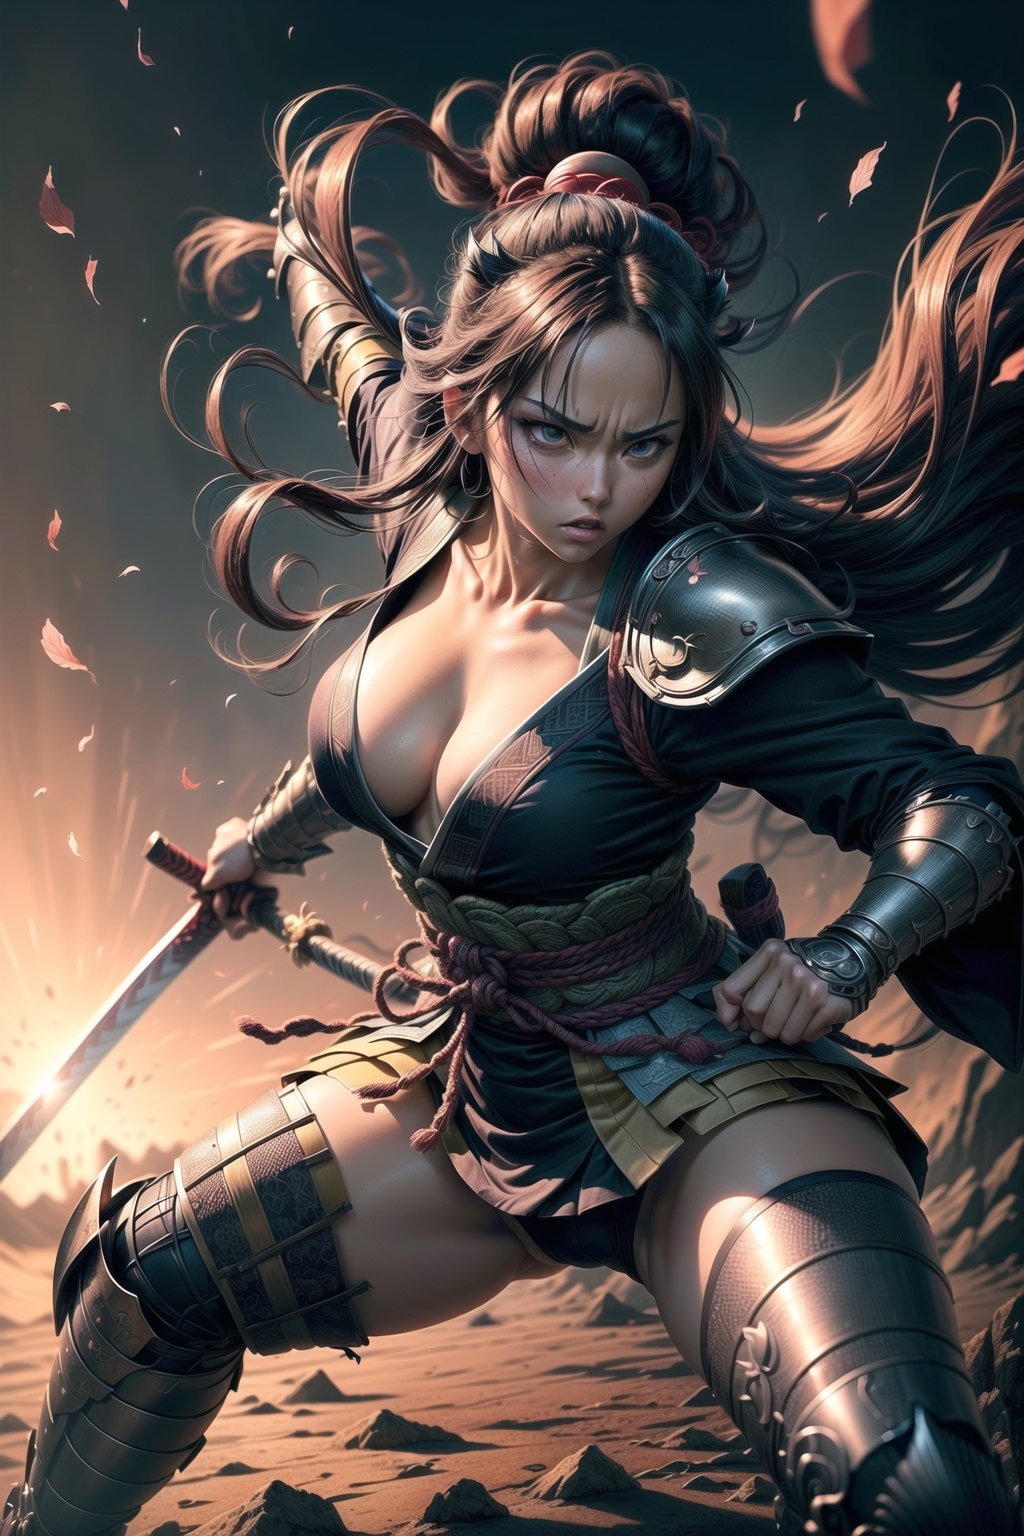 ((best quality)), ((masterpiece)), (detailed), fierce anime woman, wielding katana, battle-ready stance, intricate armor, flowing hair, (Japanese animation style:1.3), (Masashi Kishimoto:1.1), (Tite Kubo:1.1), intense gaze, dynamic background, vibrant colors, (action-packed composition:1.3), (8k resolution:1.2)
